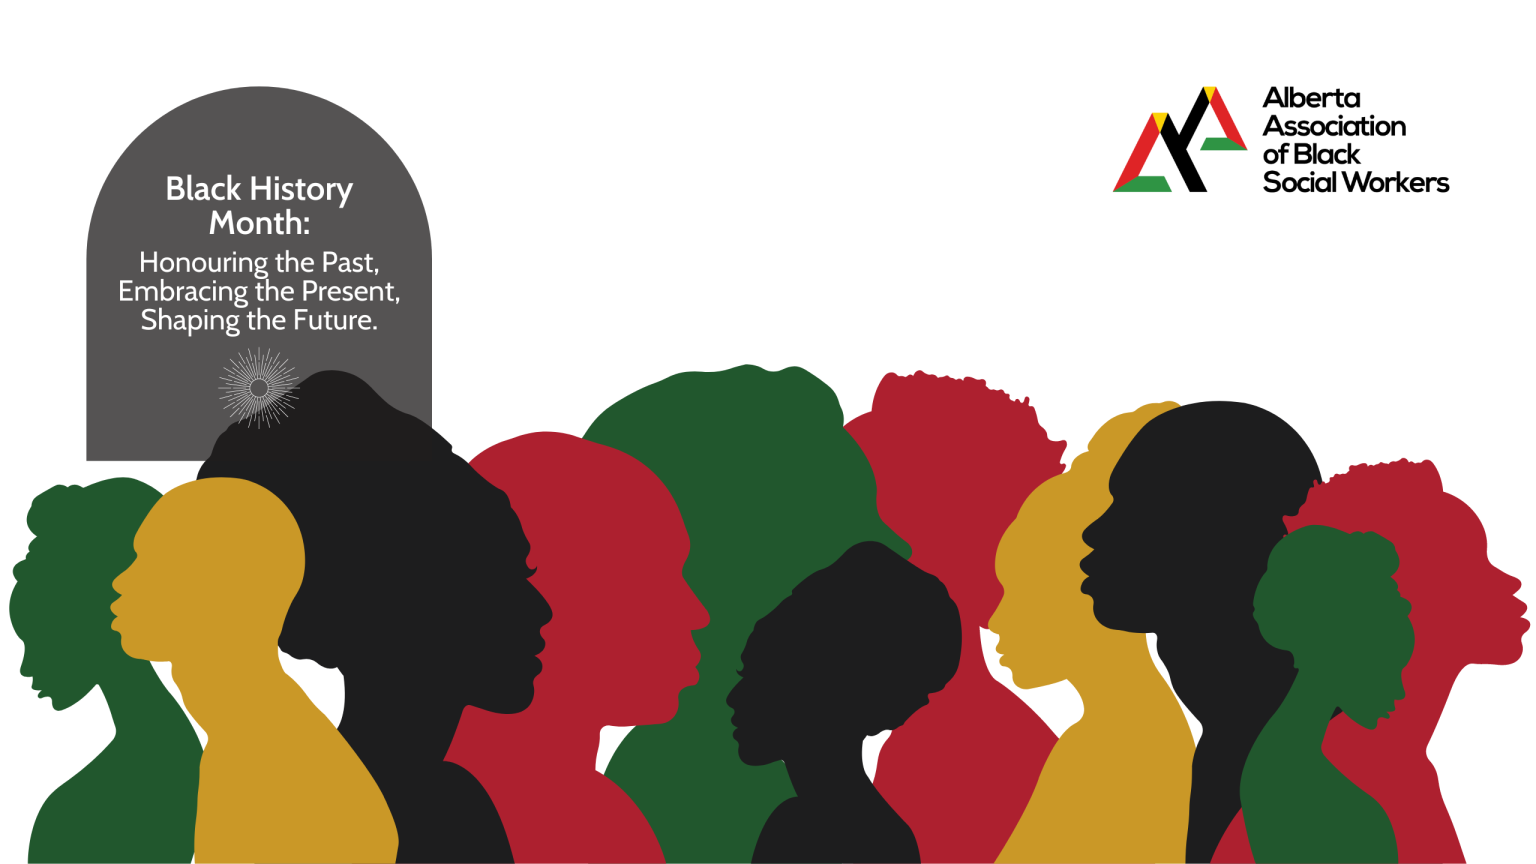 Black people graphic in colours of black history month, red, black, green and yellow.